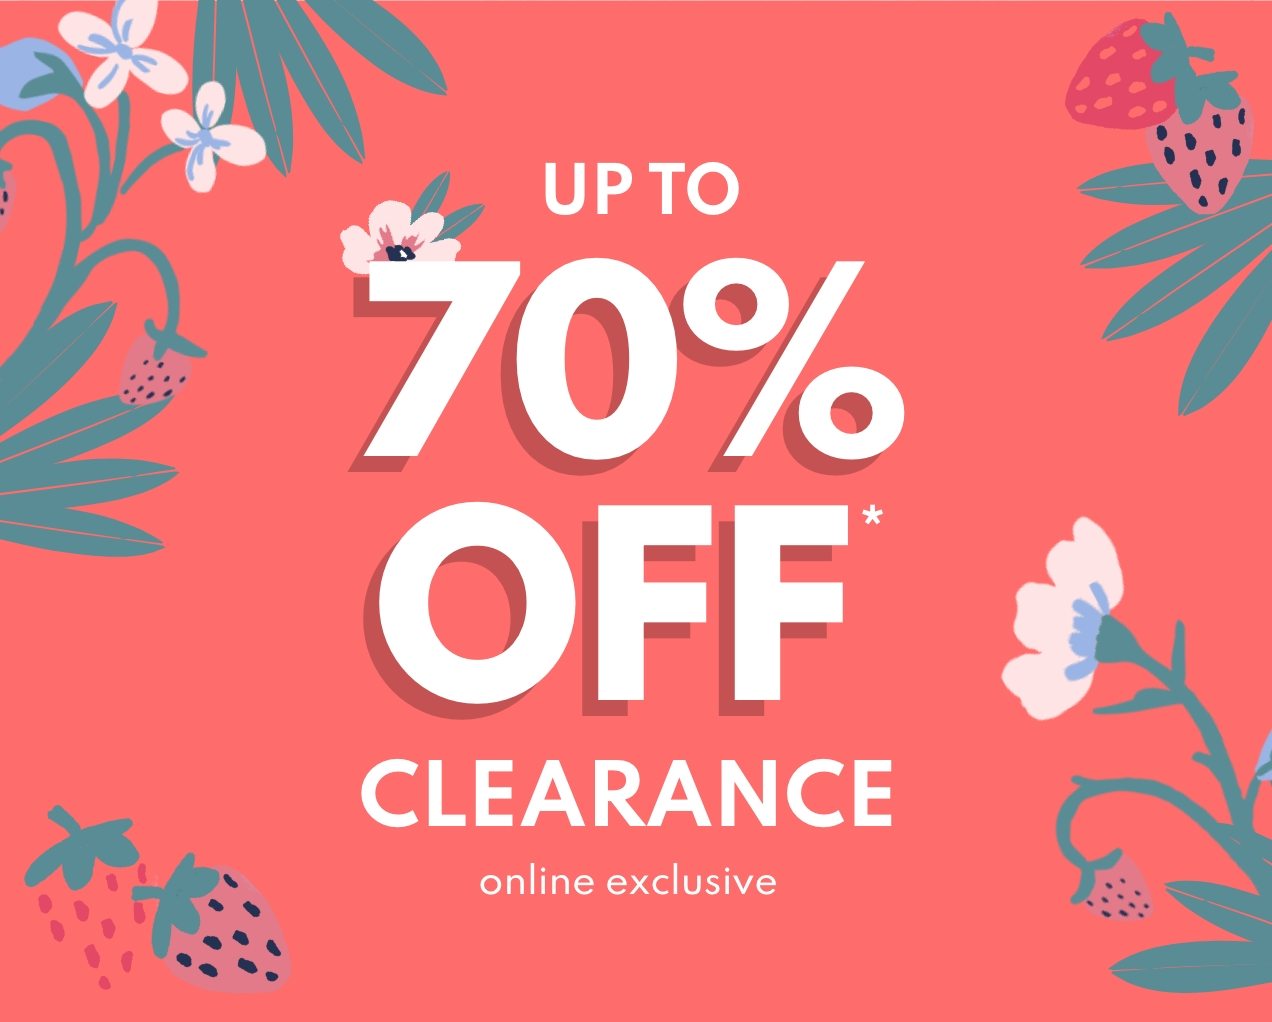 UP TO 70% OFF* CLEARANCE online exclusive 